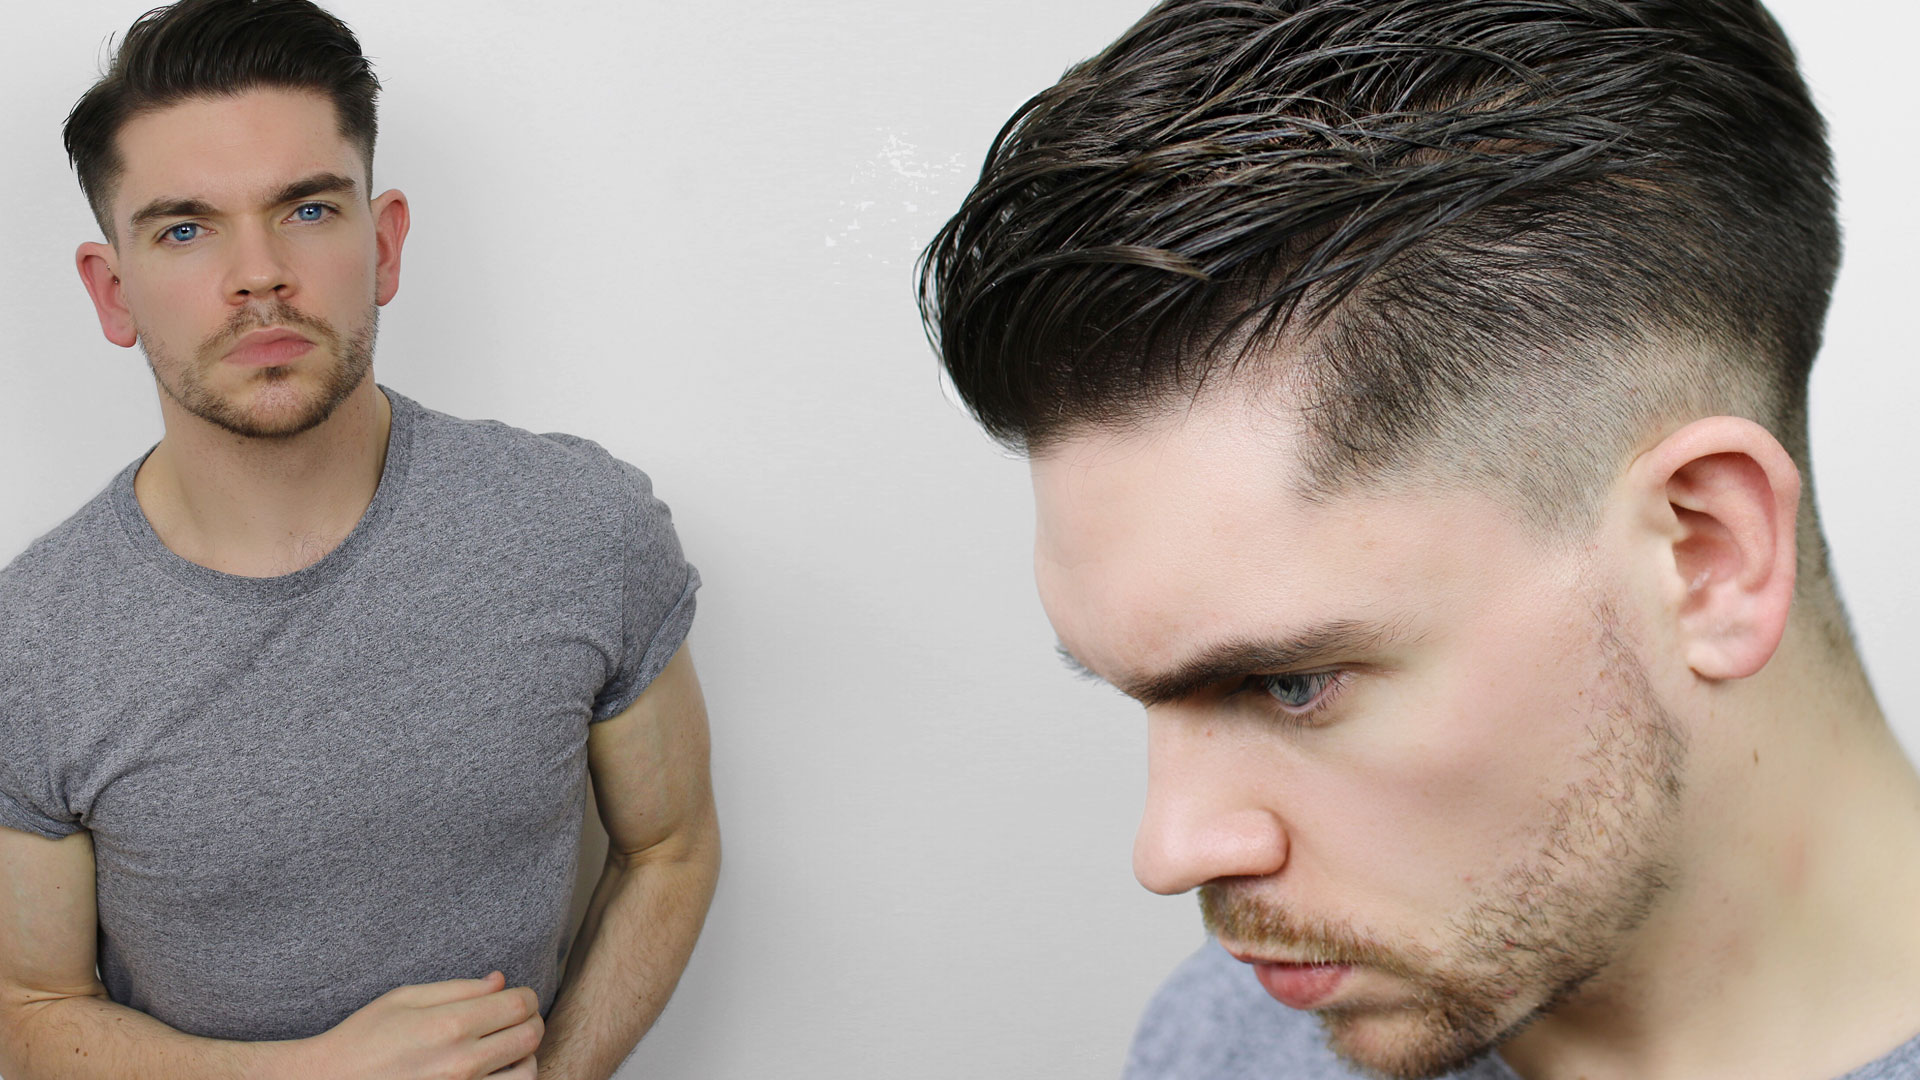 Super Cool Slick Back Haircuts For Men (44 TRENDING STYLES)